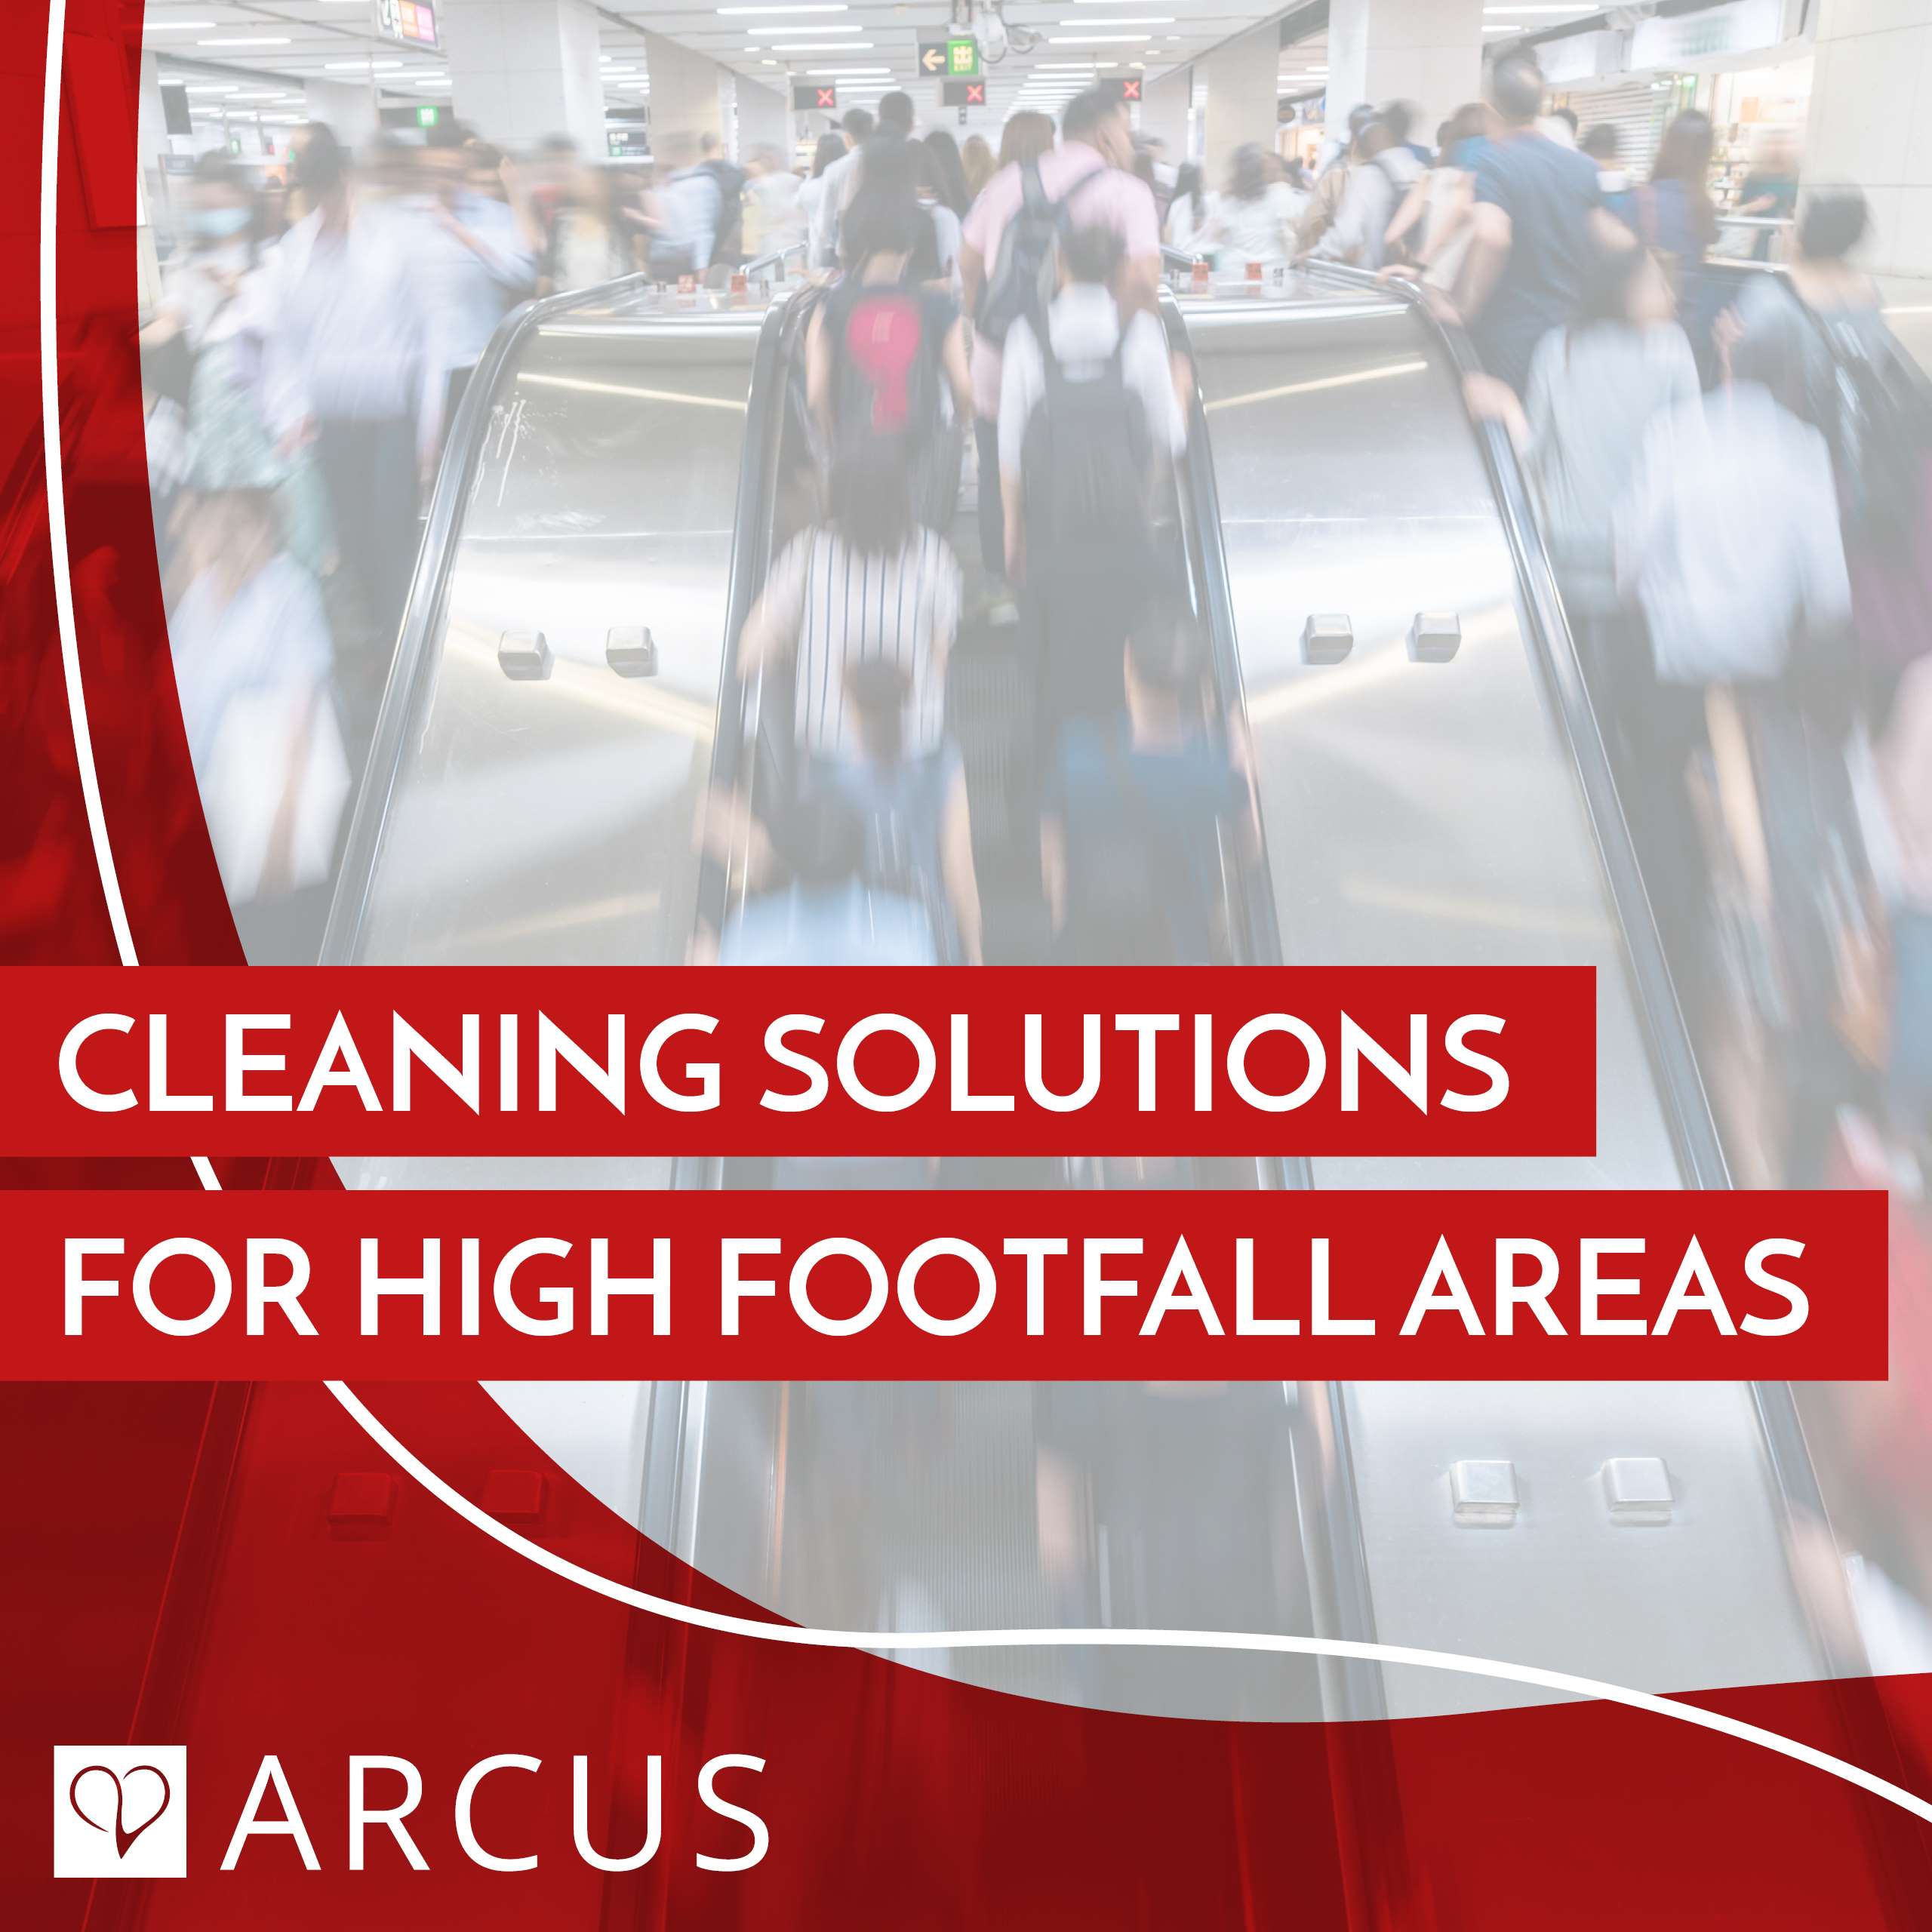 Cleaning solutions for high footfall areas